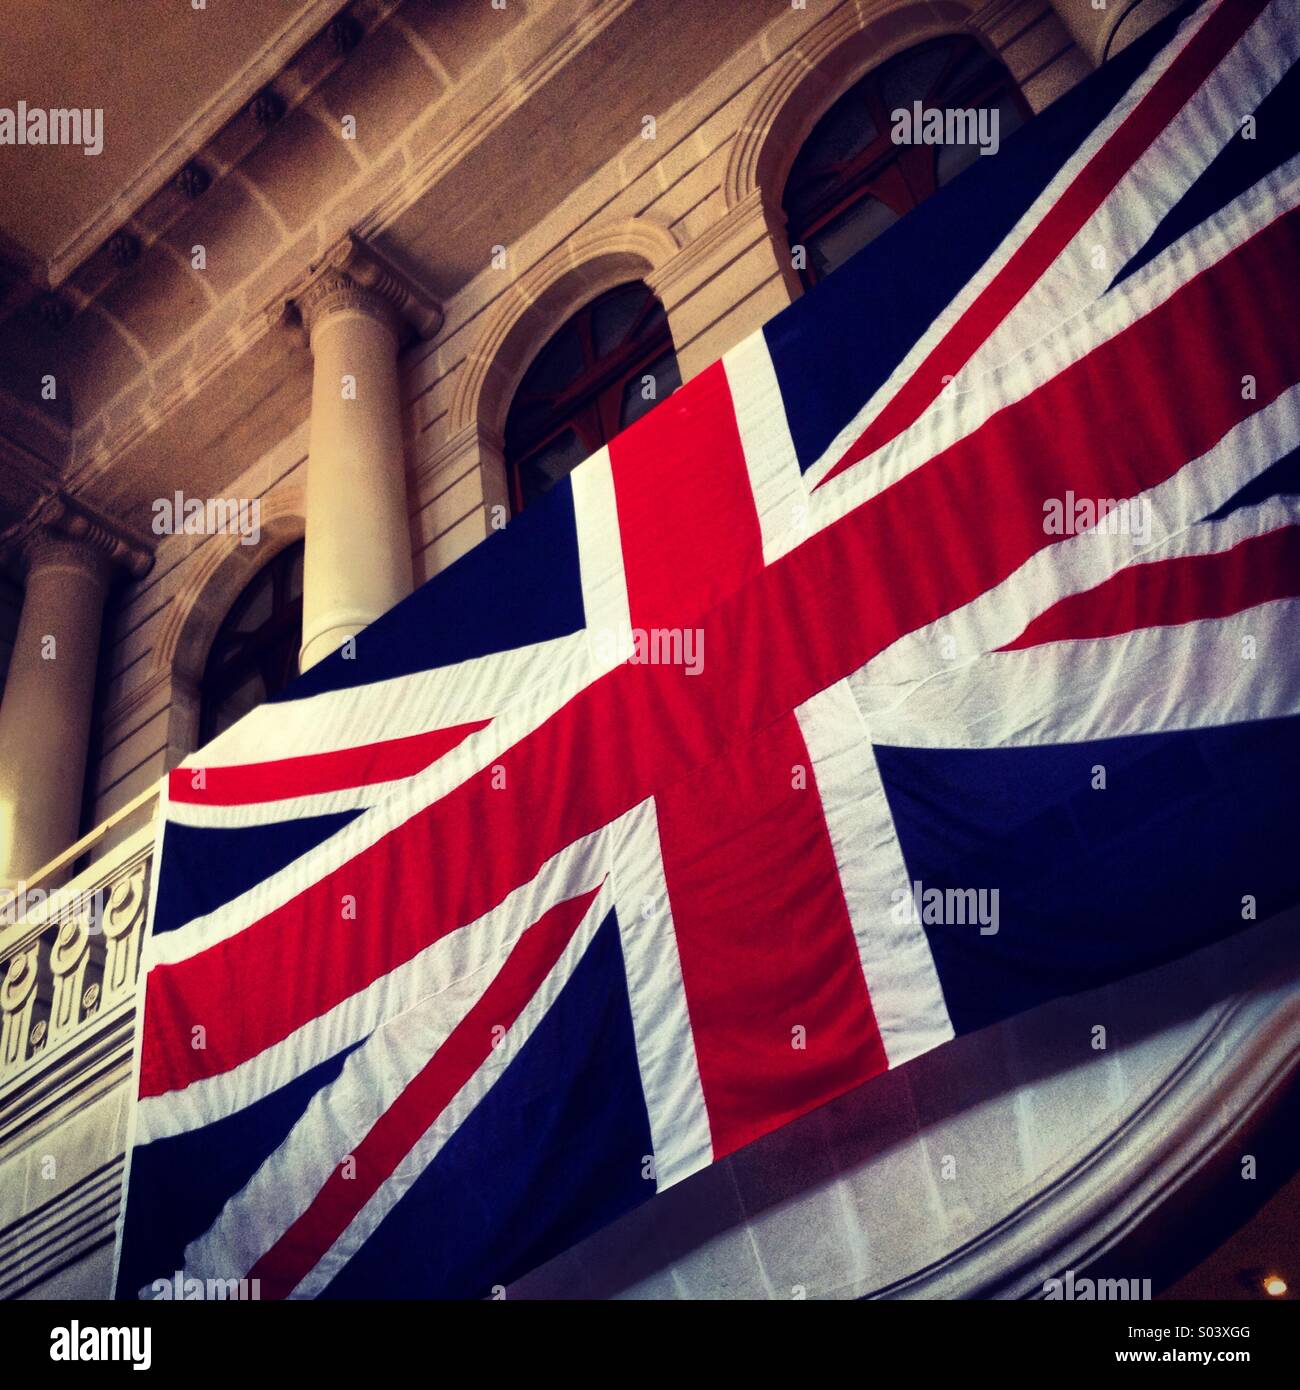 British Union Jack flag hanging in classical building. Stock Photo